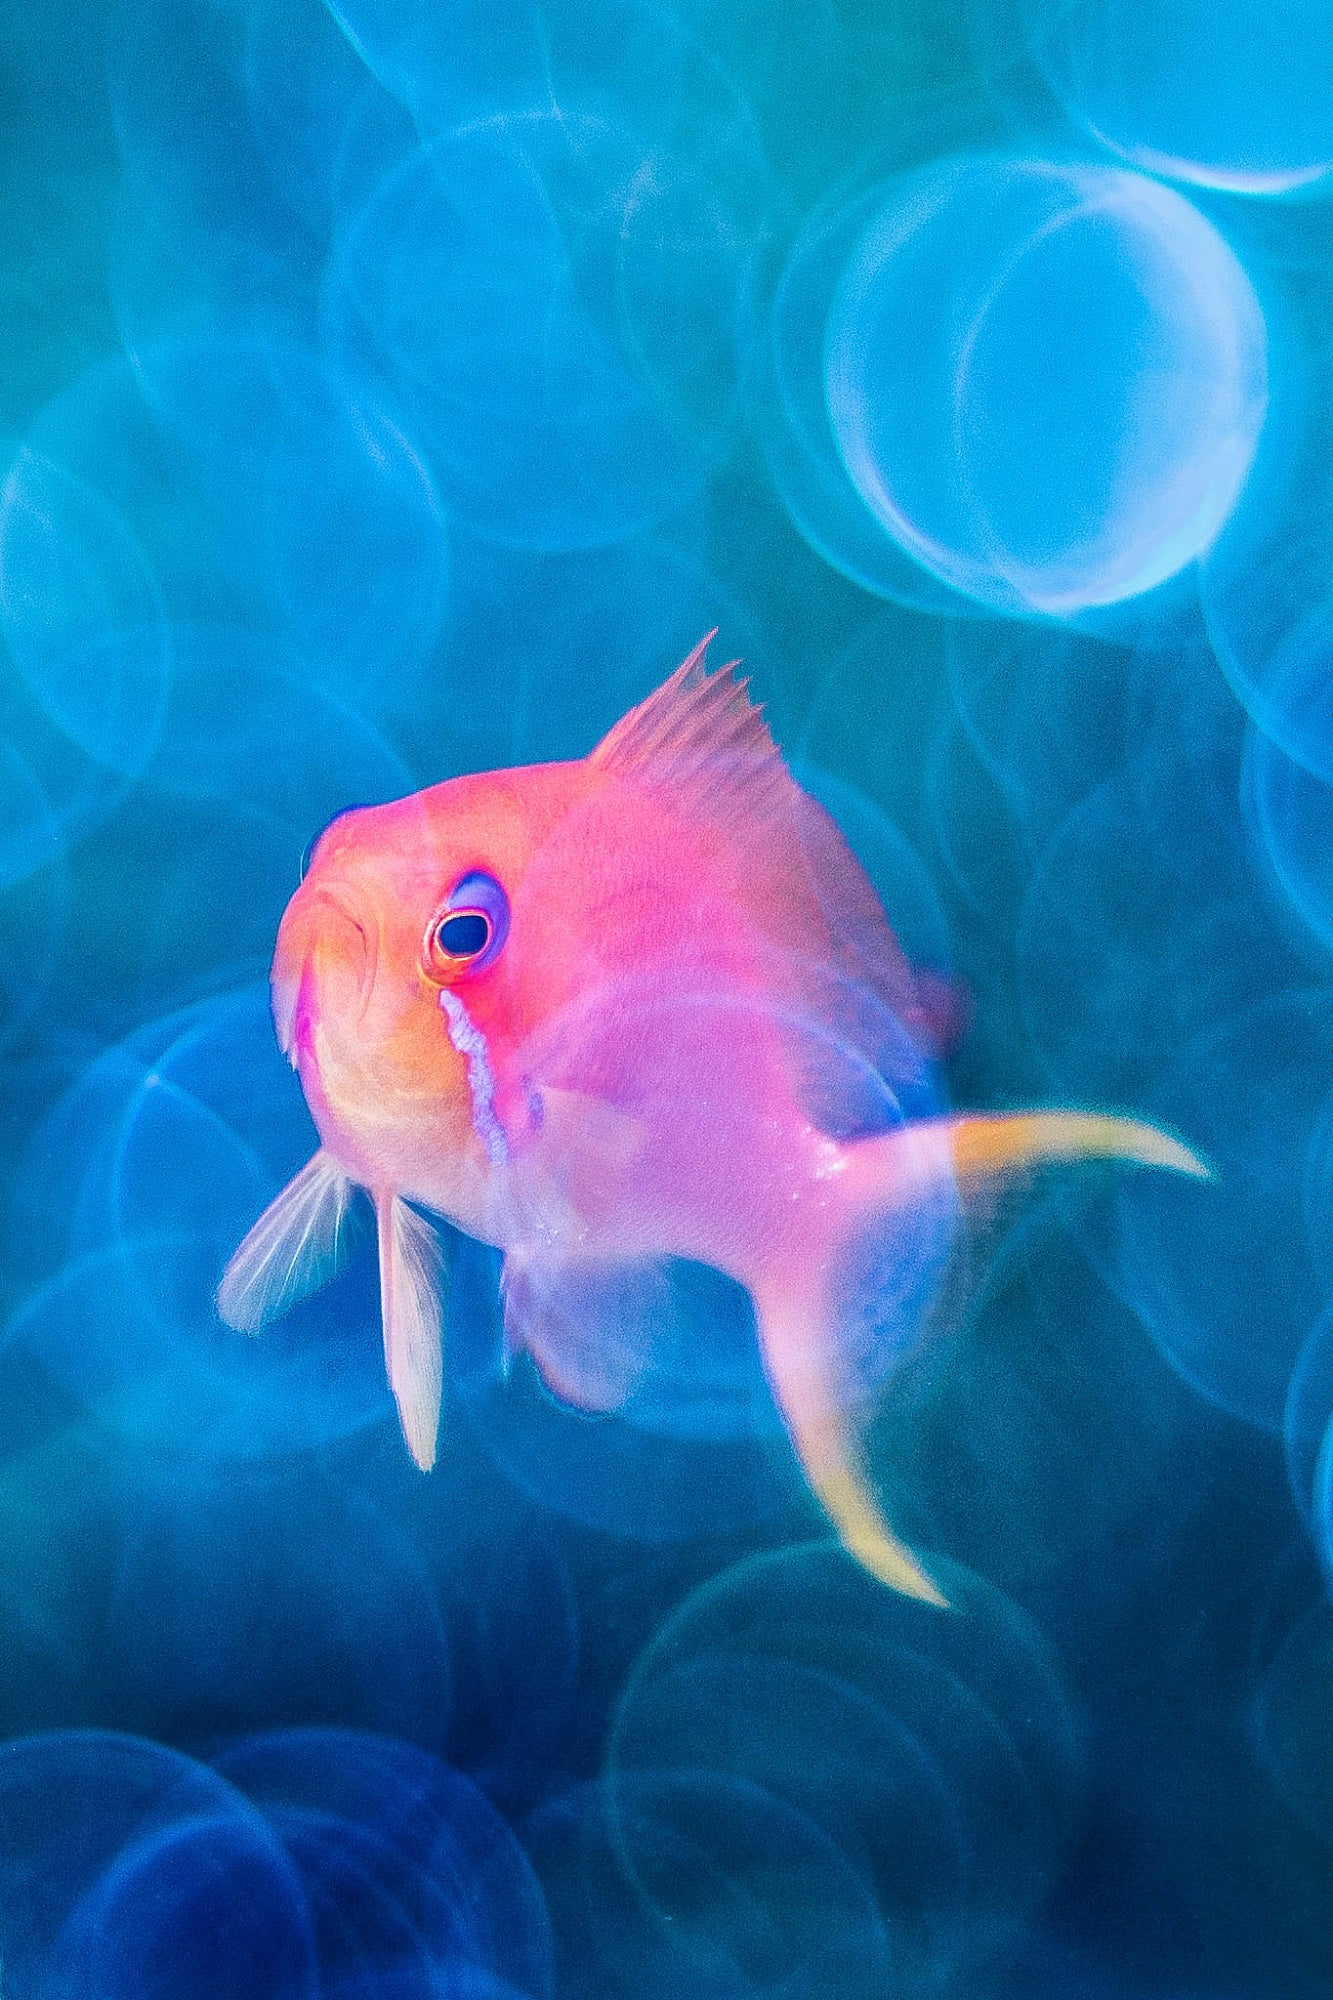 Pink and purple fish in Red Sea captured for photography awards